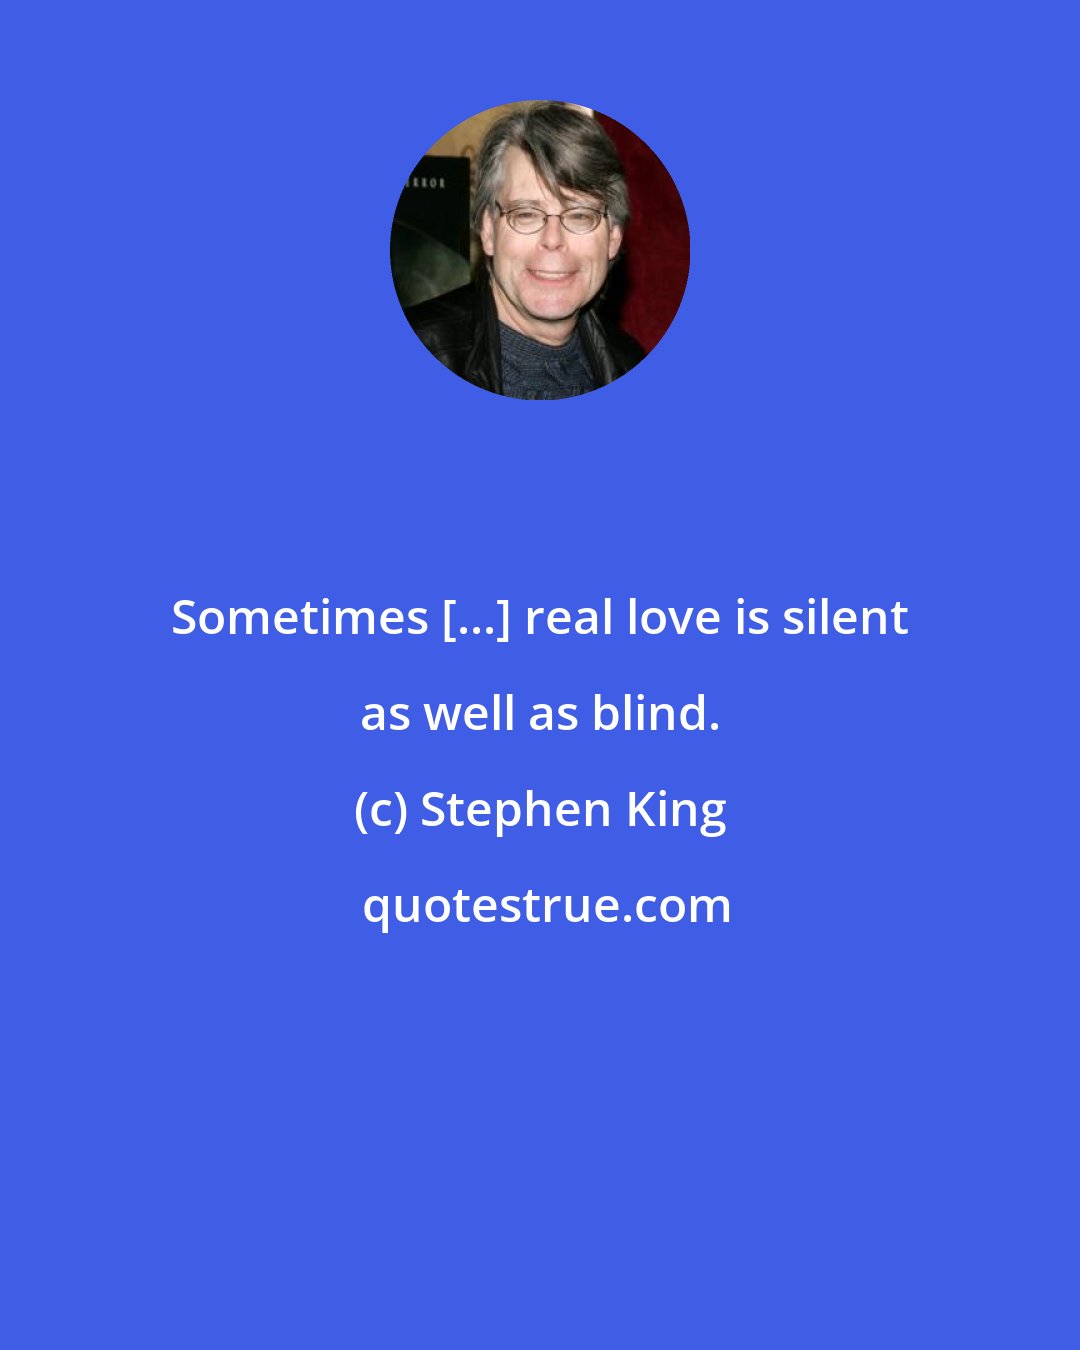 Stephen King: Sometimes [...] real love is silent as well as blind.